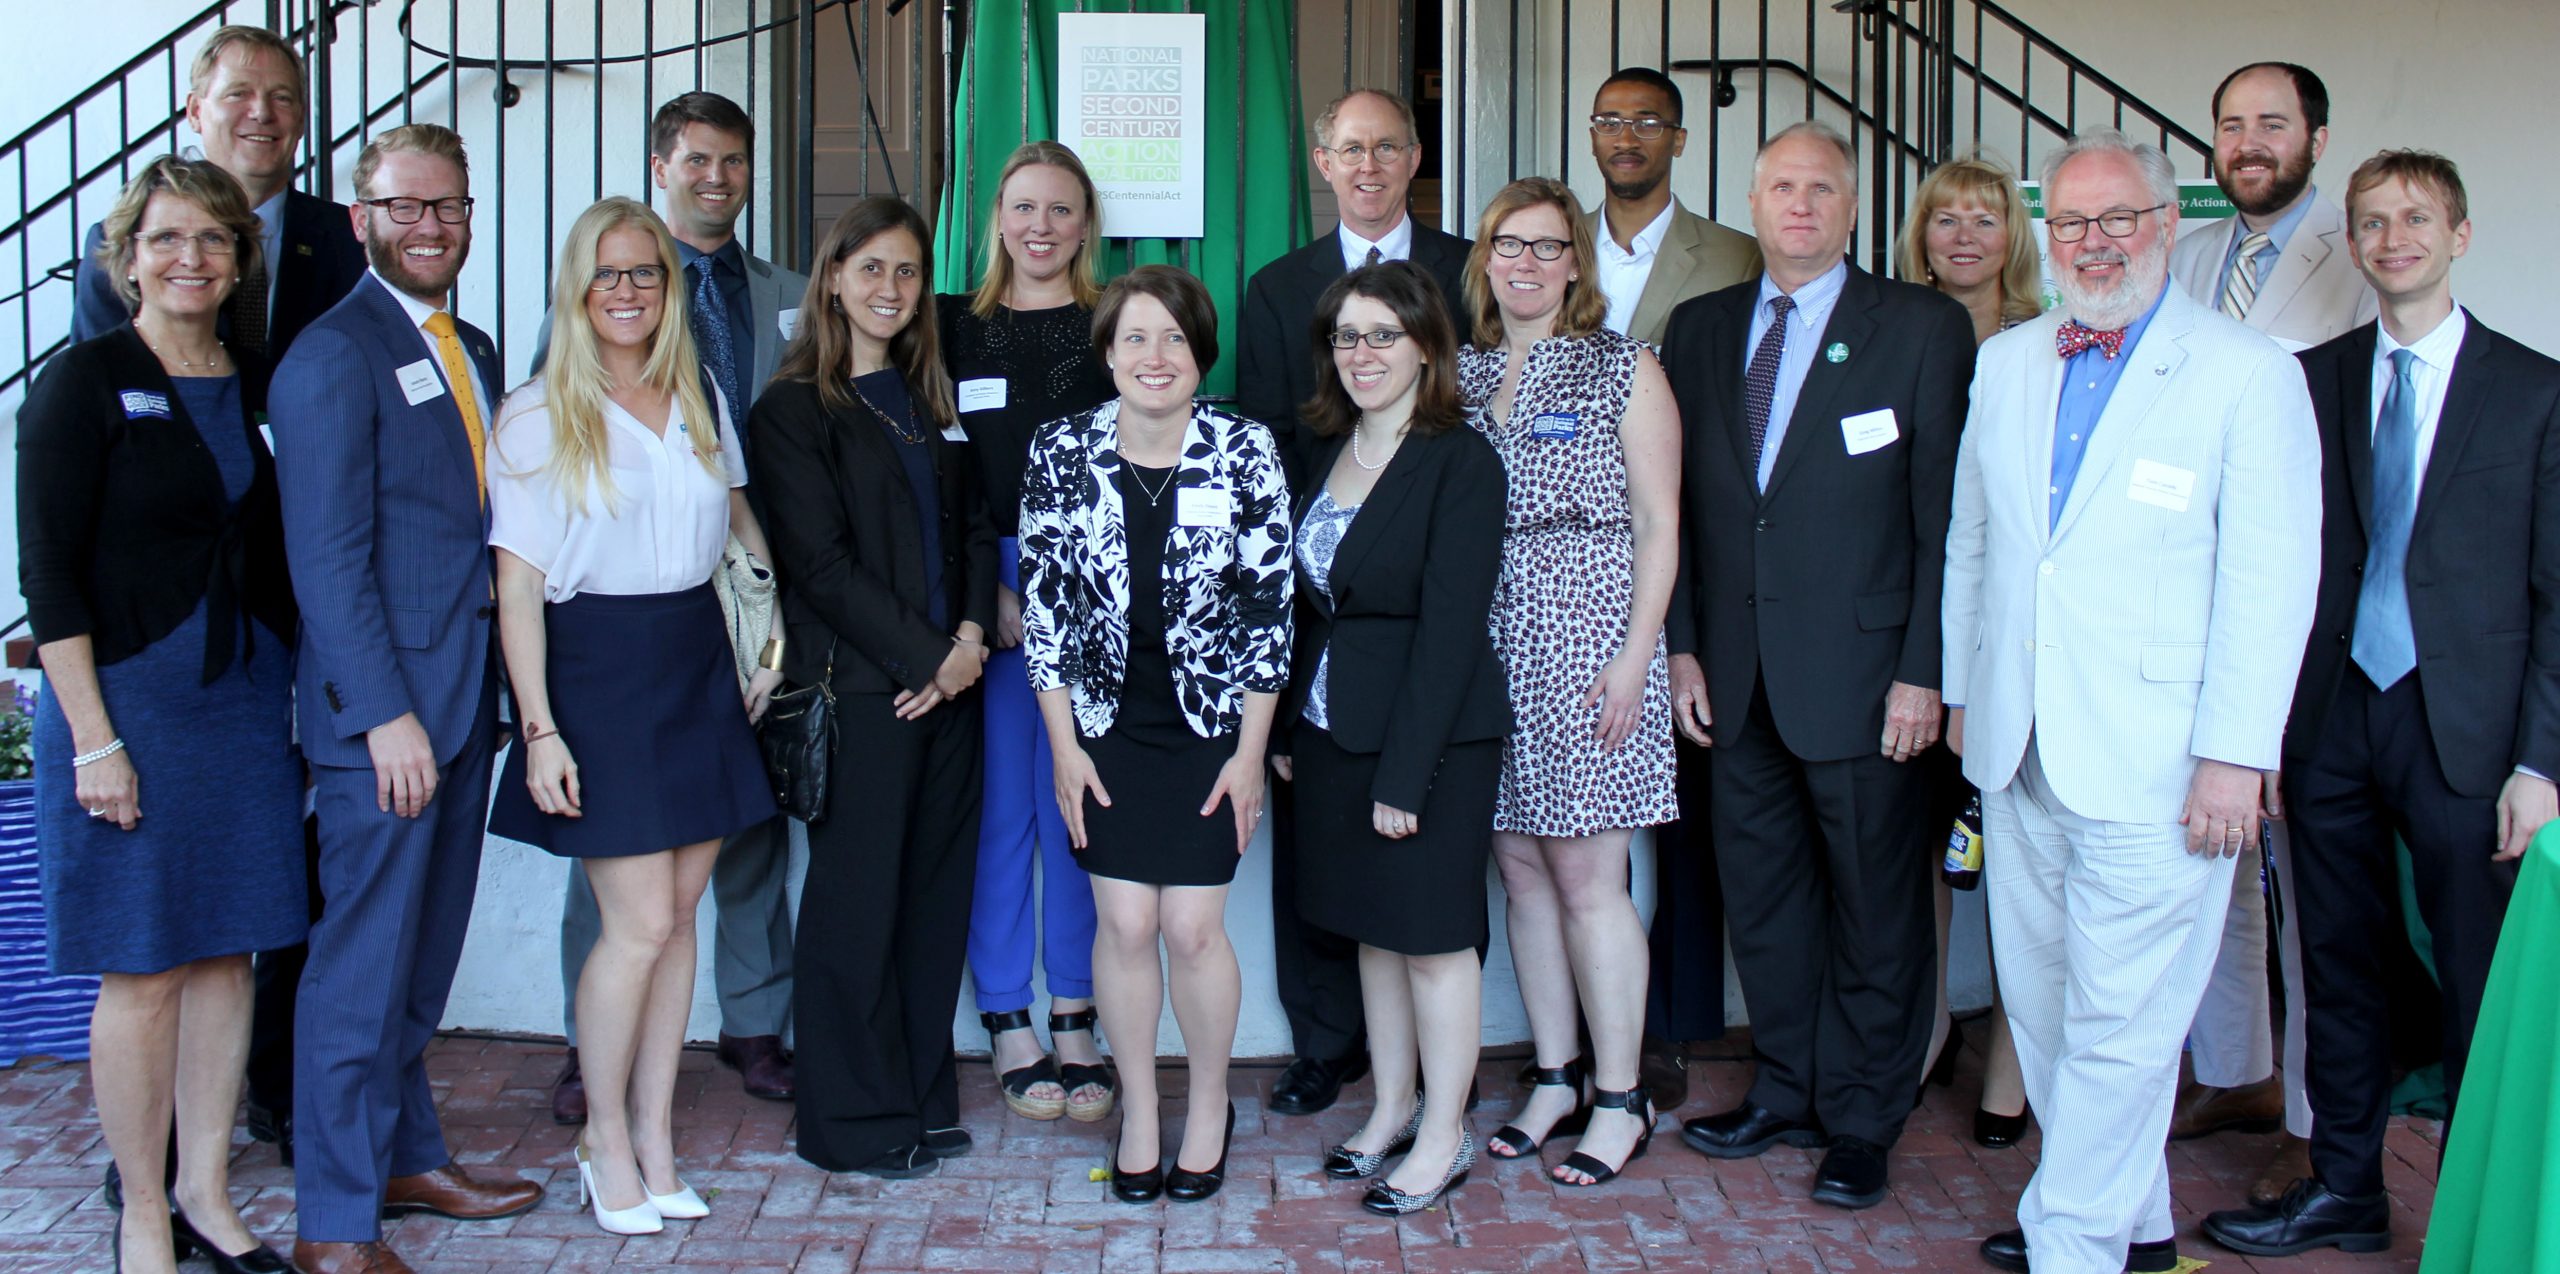 AHF staff with other members of the National Parks Second Century Action Coalition at the reception